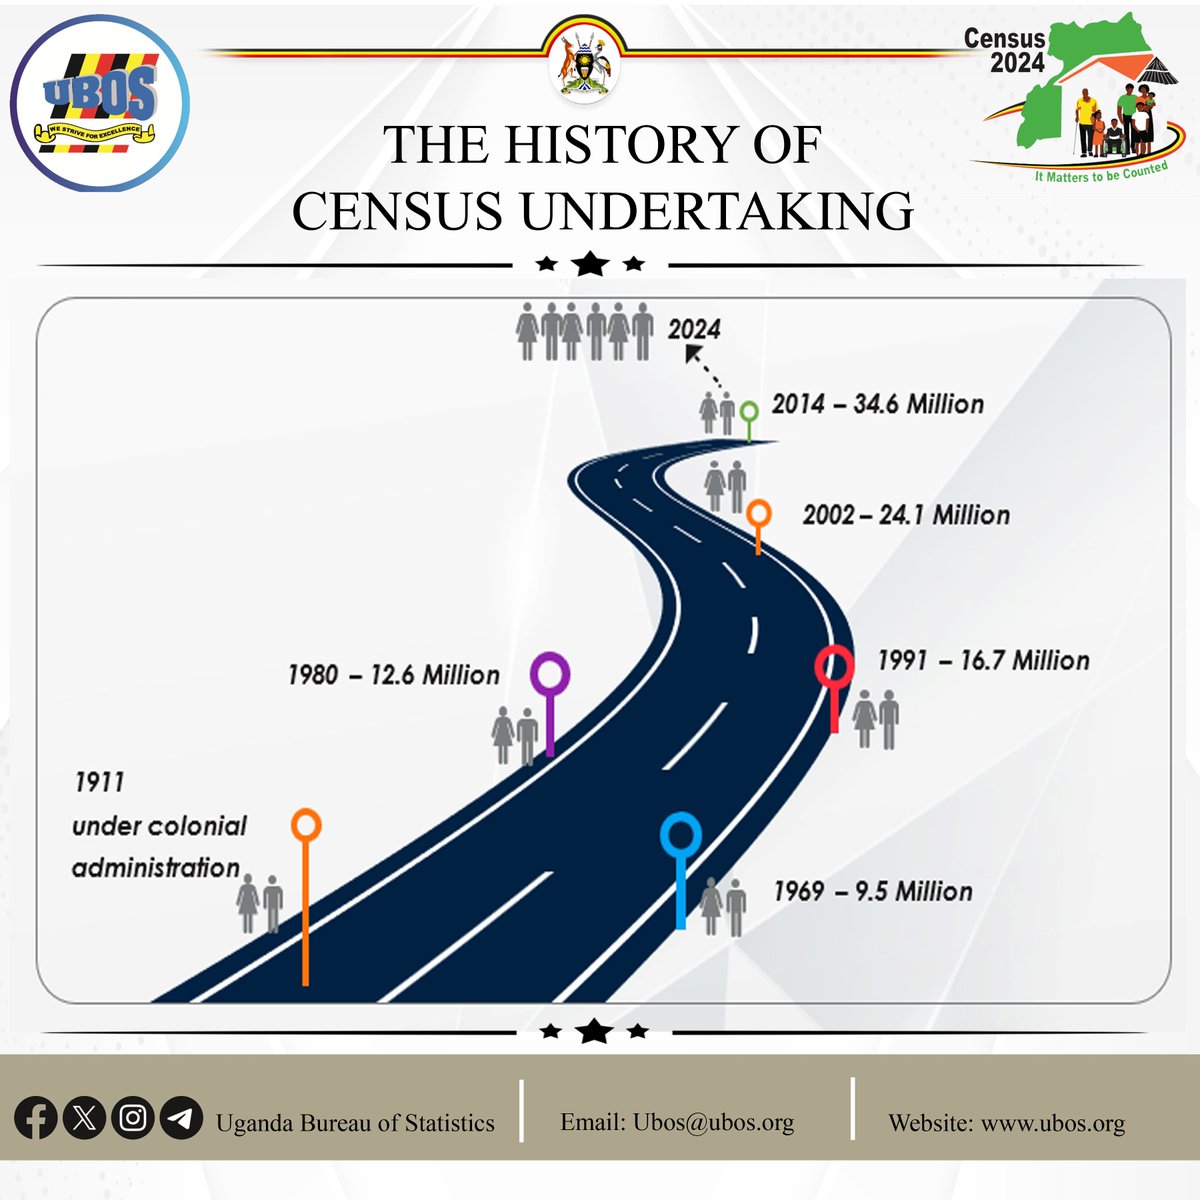 𝔻𝕚𝕕 𝕪𝕠𝕦 𝕜𝕟𝕠𝕨? 👉🏿 The #UgandaCensus2024 will be the 11th to be carried out in Uganda. 👉🏿 The 6th to be carried out after independence. 👉🏿 The 3rd census to be carried out by UBOS. 👉🏿 It's going to be the first digital/ paperless census to